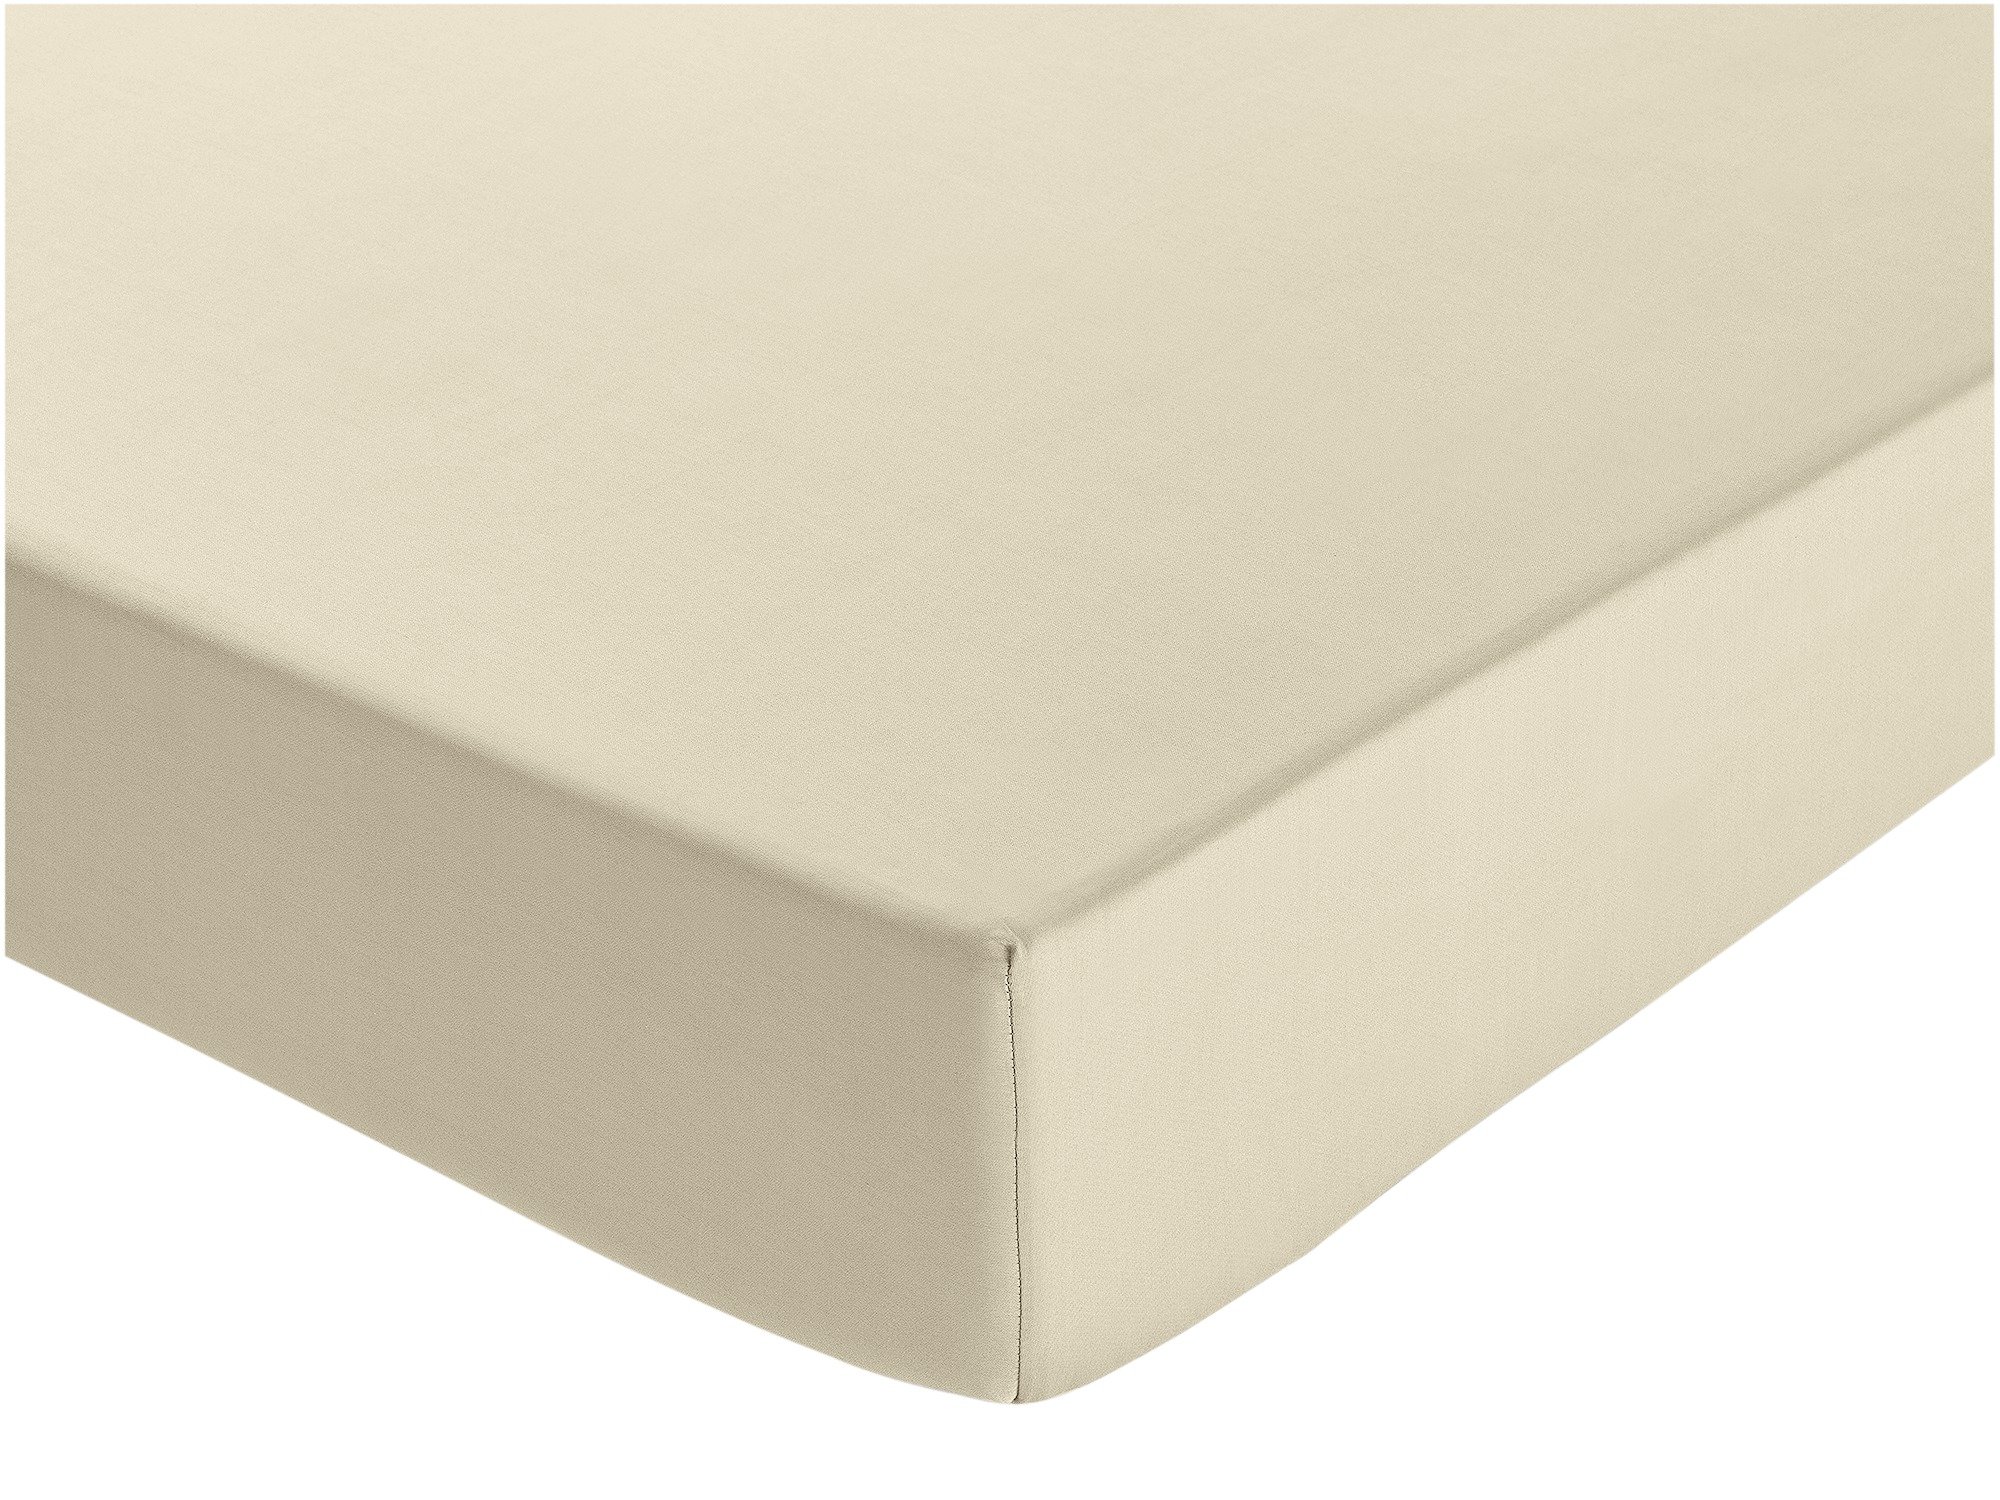 Argos Home 100% Cotton Ivory Ex Deep Fitted Sheet - King